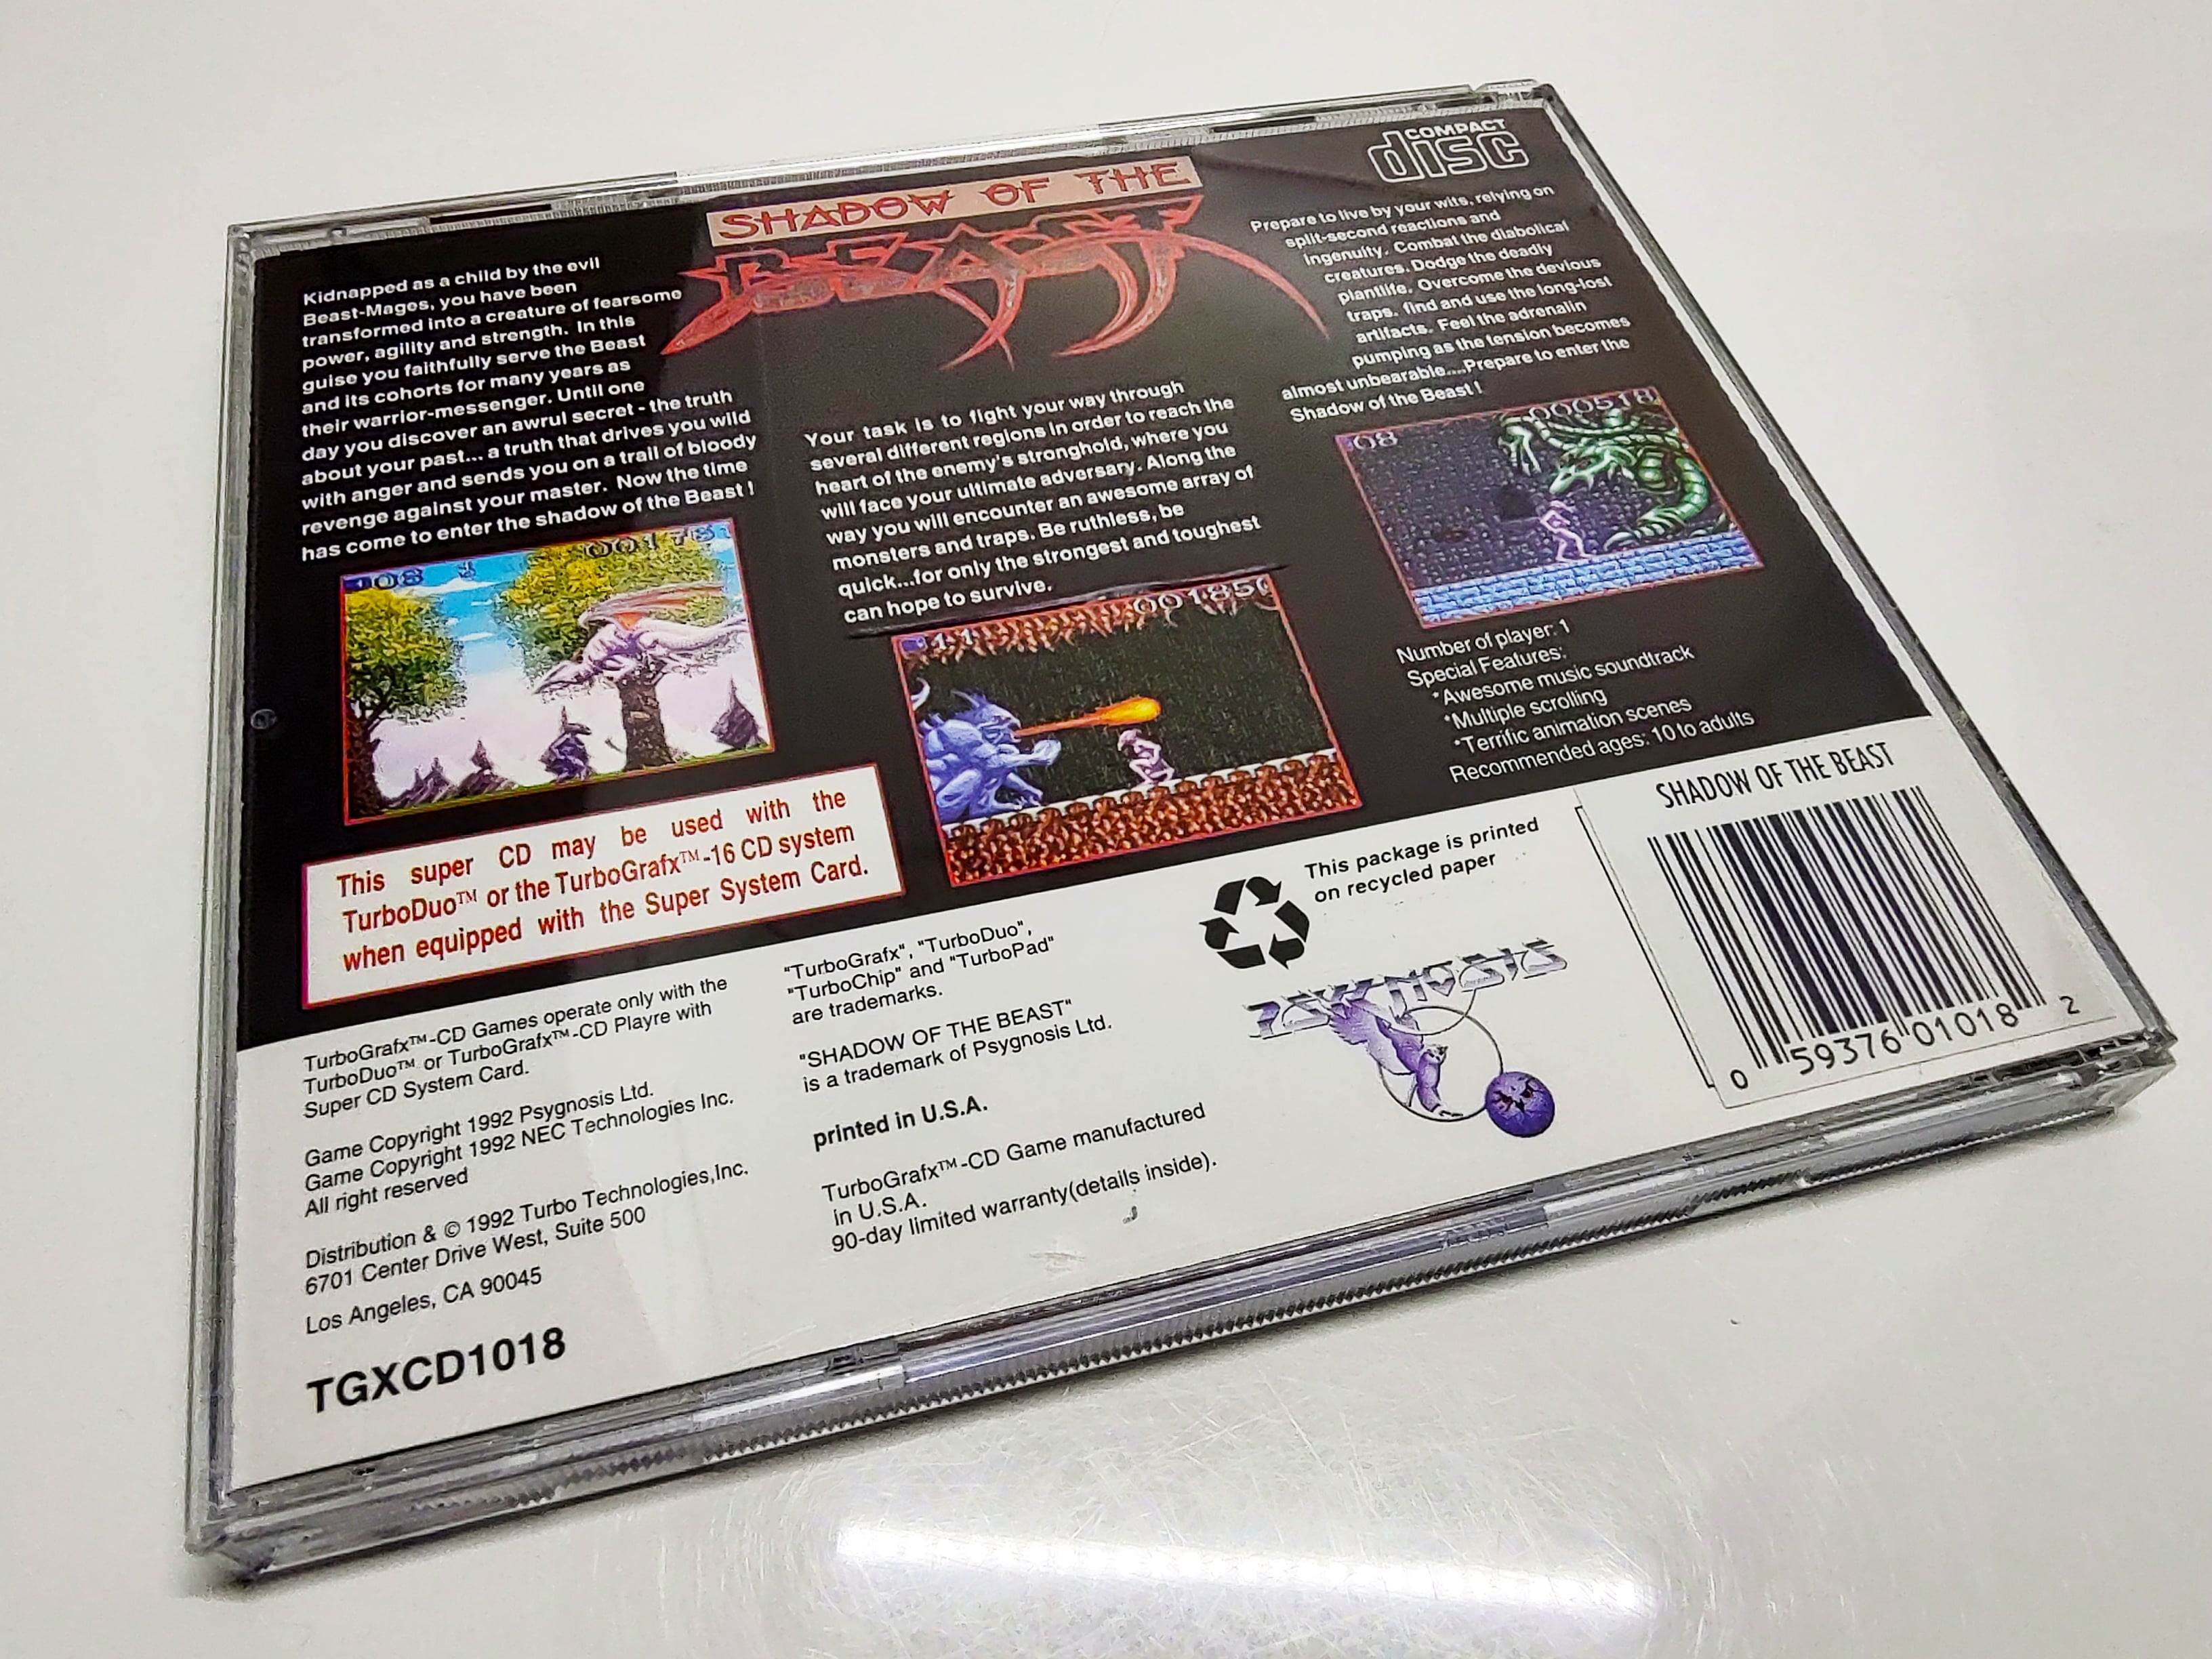 Shadow of the Beast | TurboGrafx-16 Super CD | Case | Back